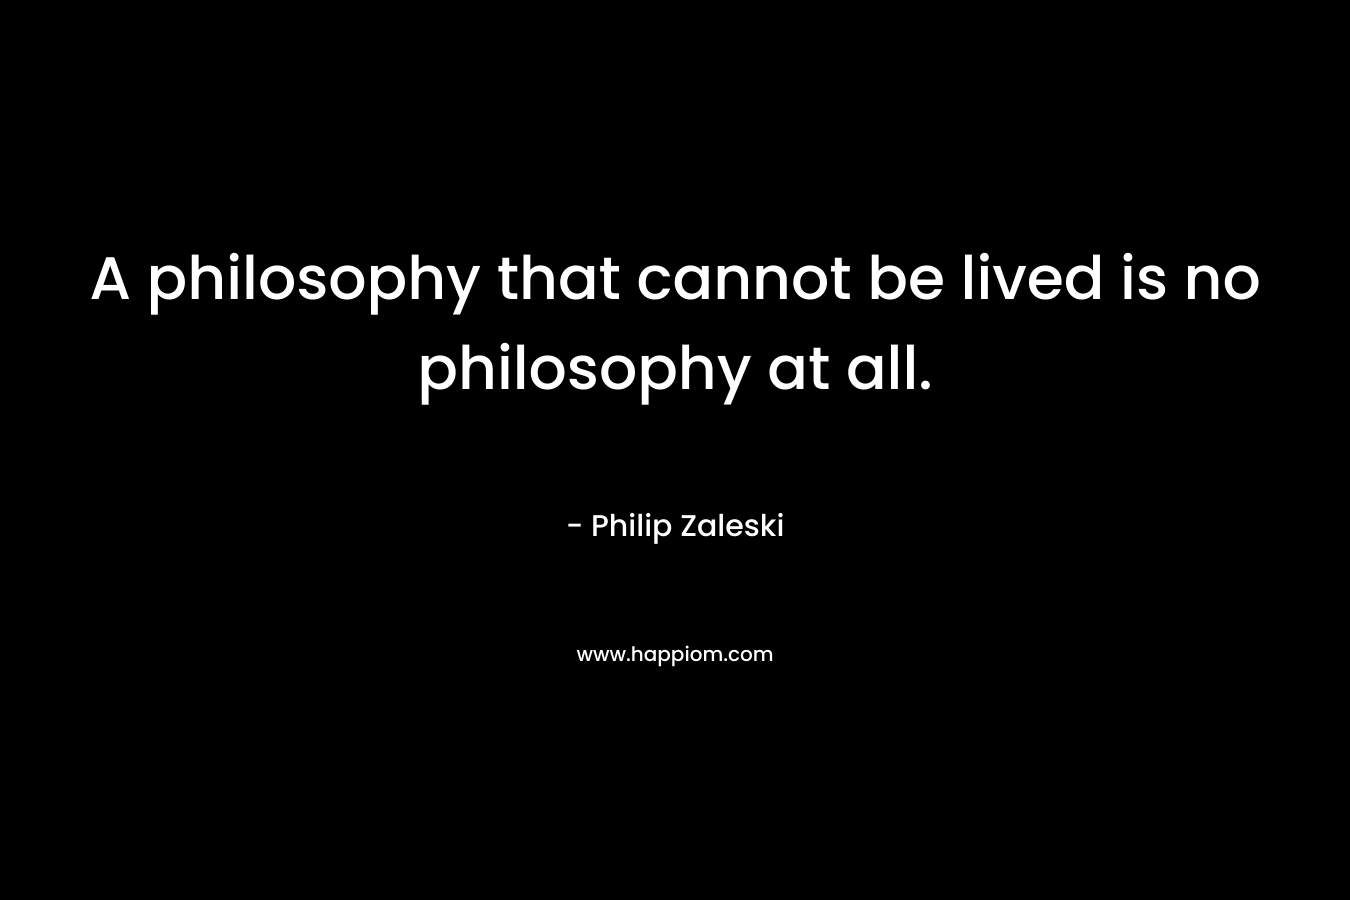 A philosophy that cannot be lived is no philosophy at all. – Philip Zaleski